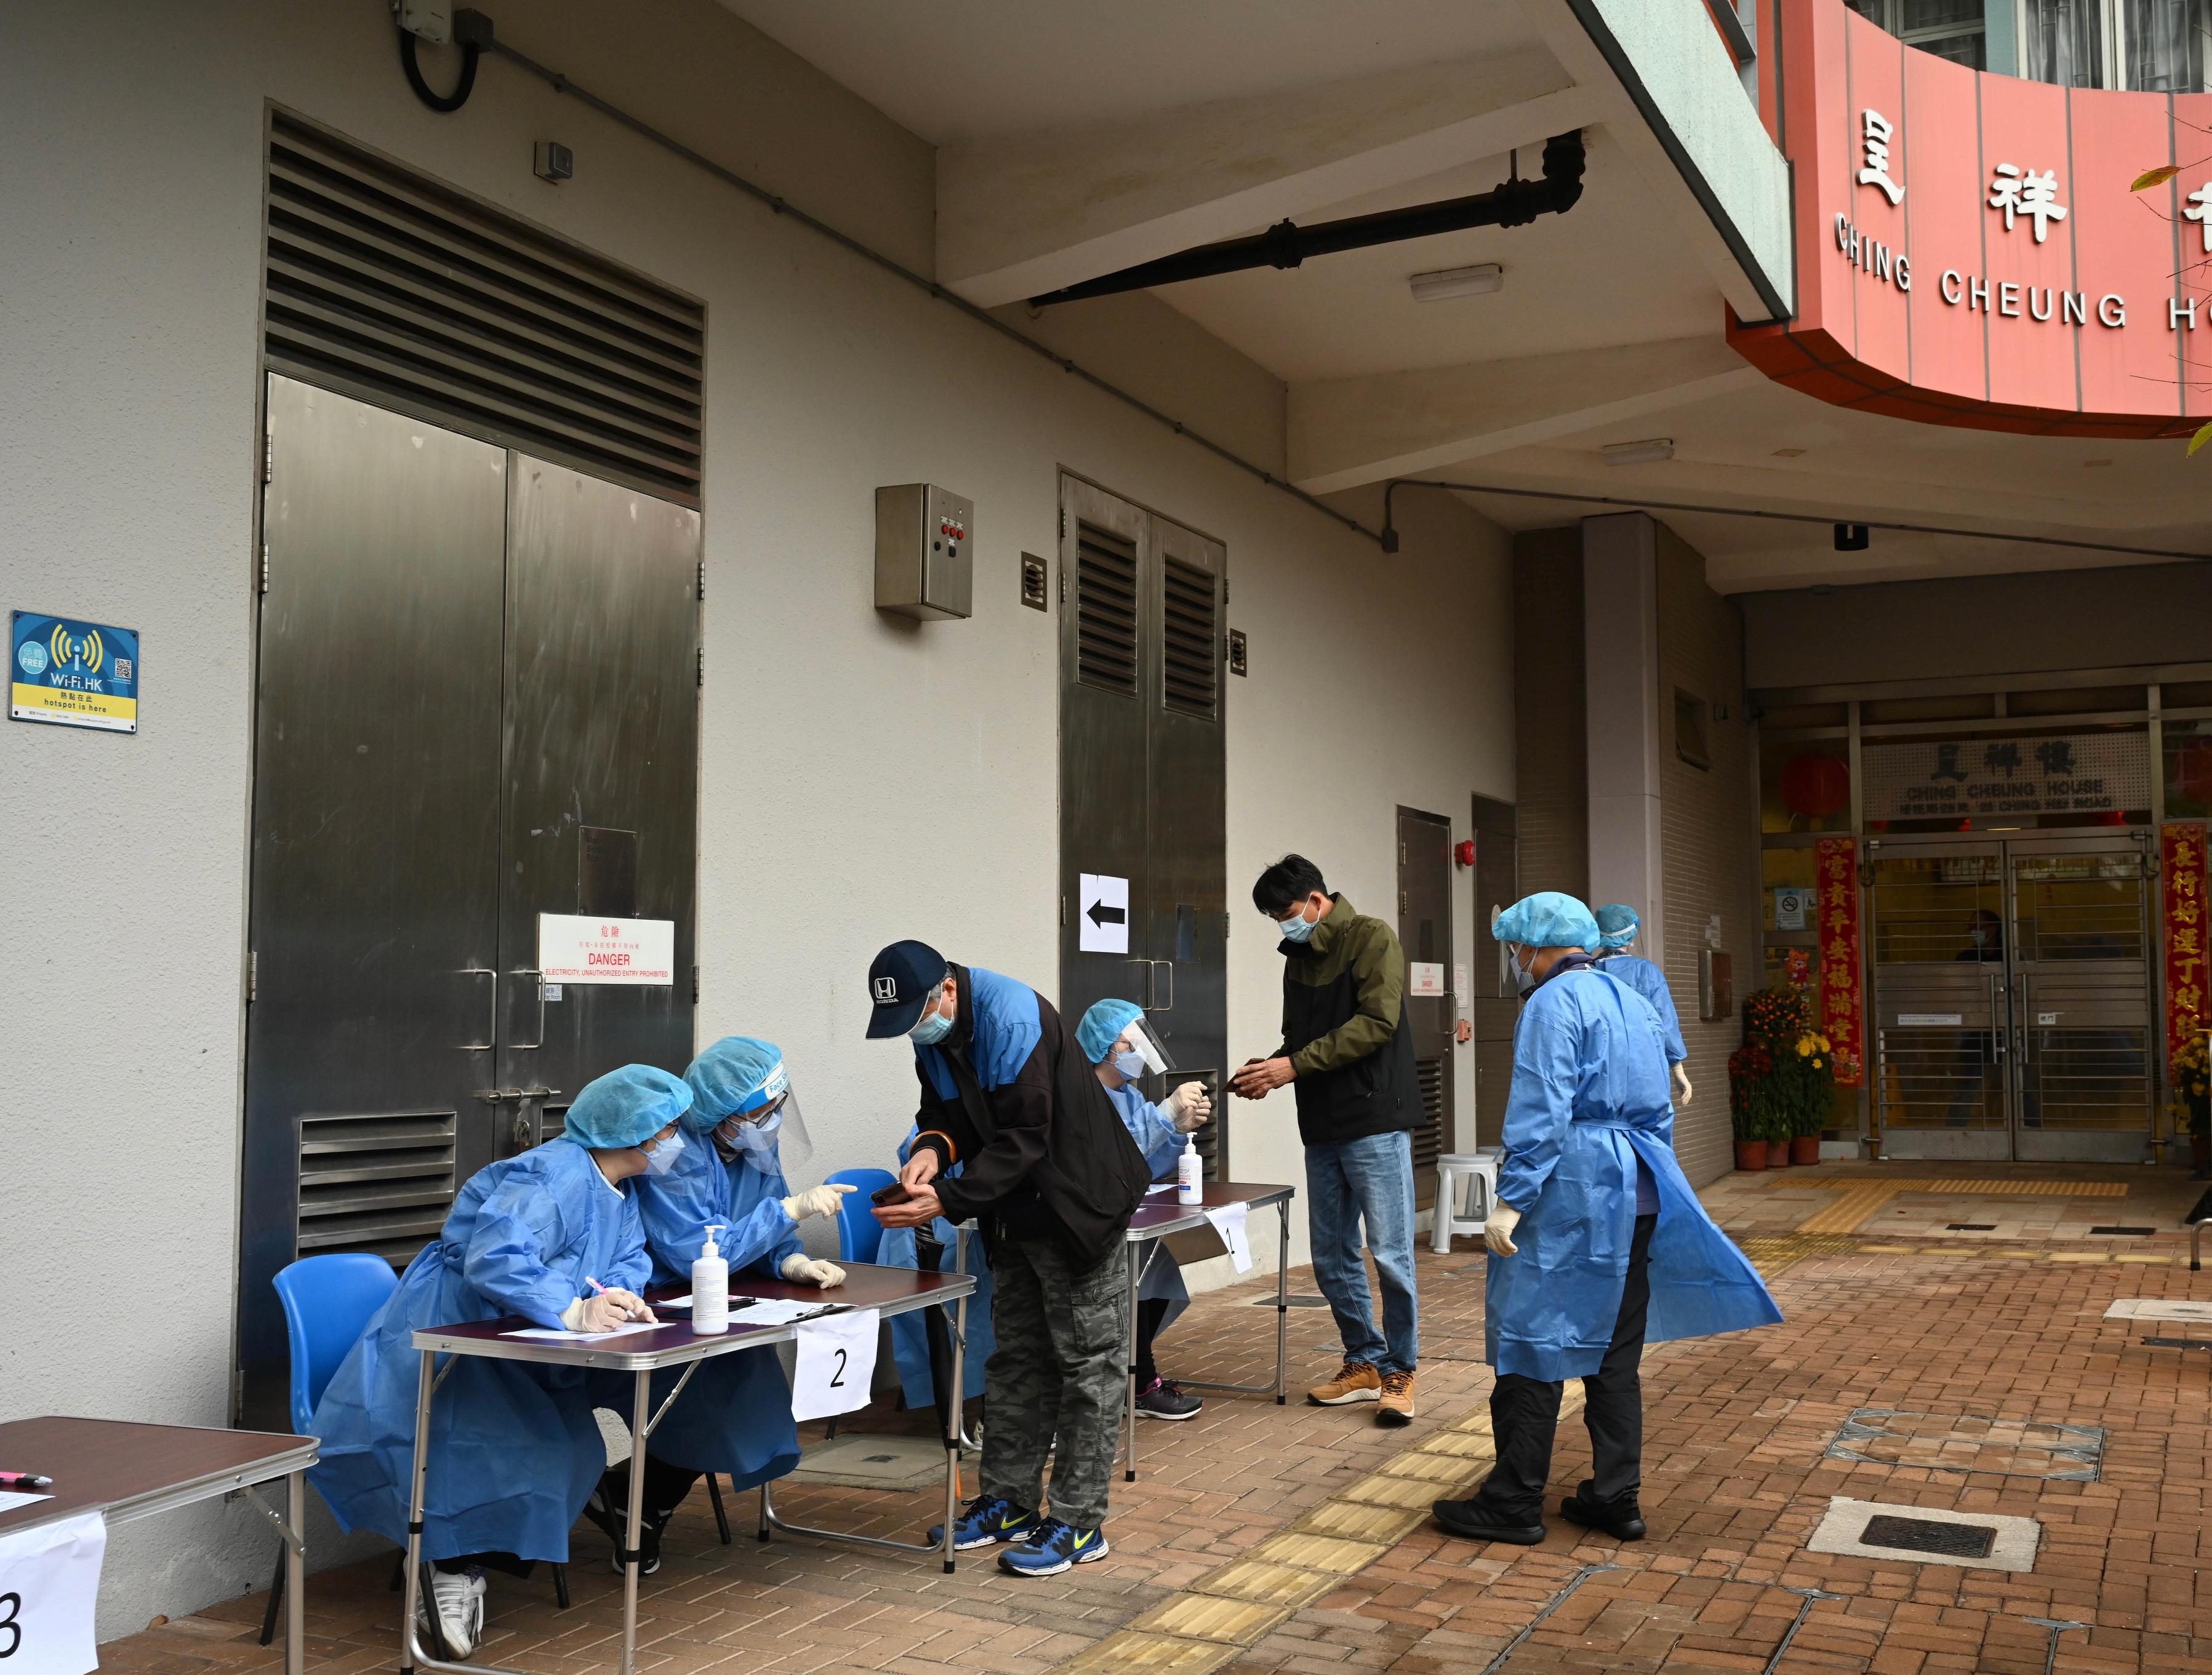 The Government yesterday (February 12) made a "restriction-testing declaration" and issued a compulsory testing notice in respect of Ching Cheung House, Cheung Lung Wai Estate. Photo shows staff members of the Housing Department today (February 13) checking whether persons in the "restricted area" have undergone compulsory testing in the enforcement operation.
